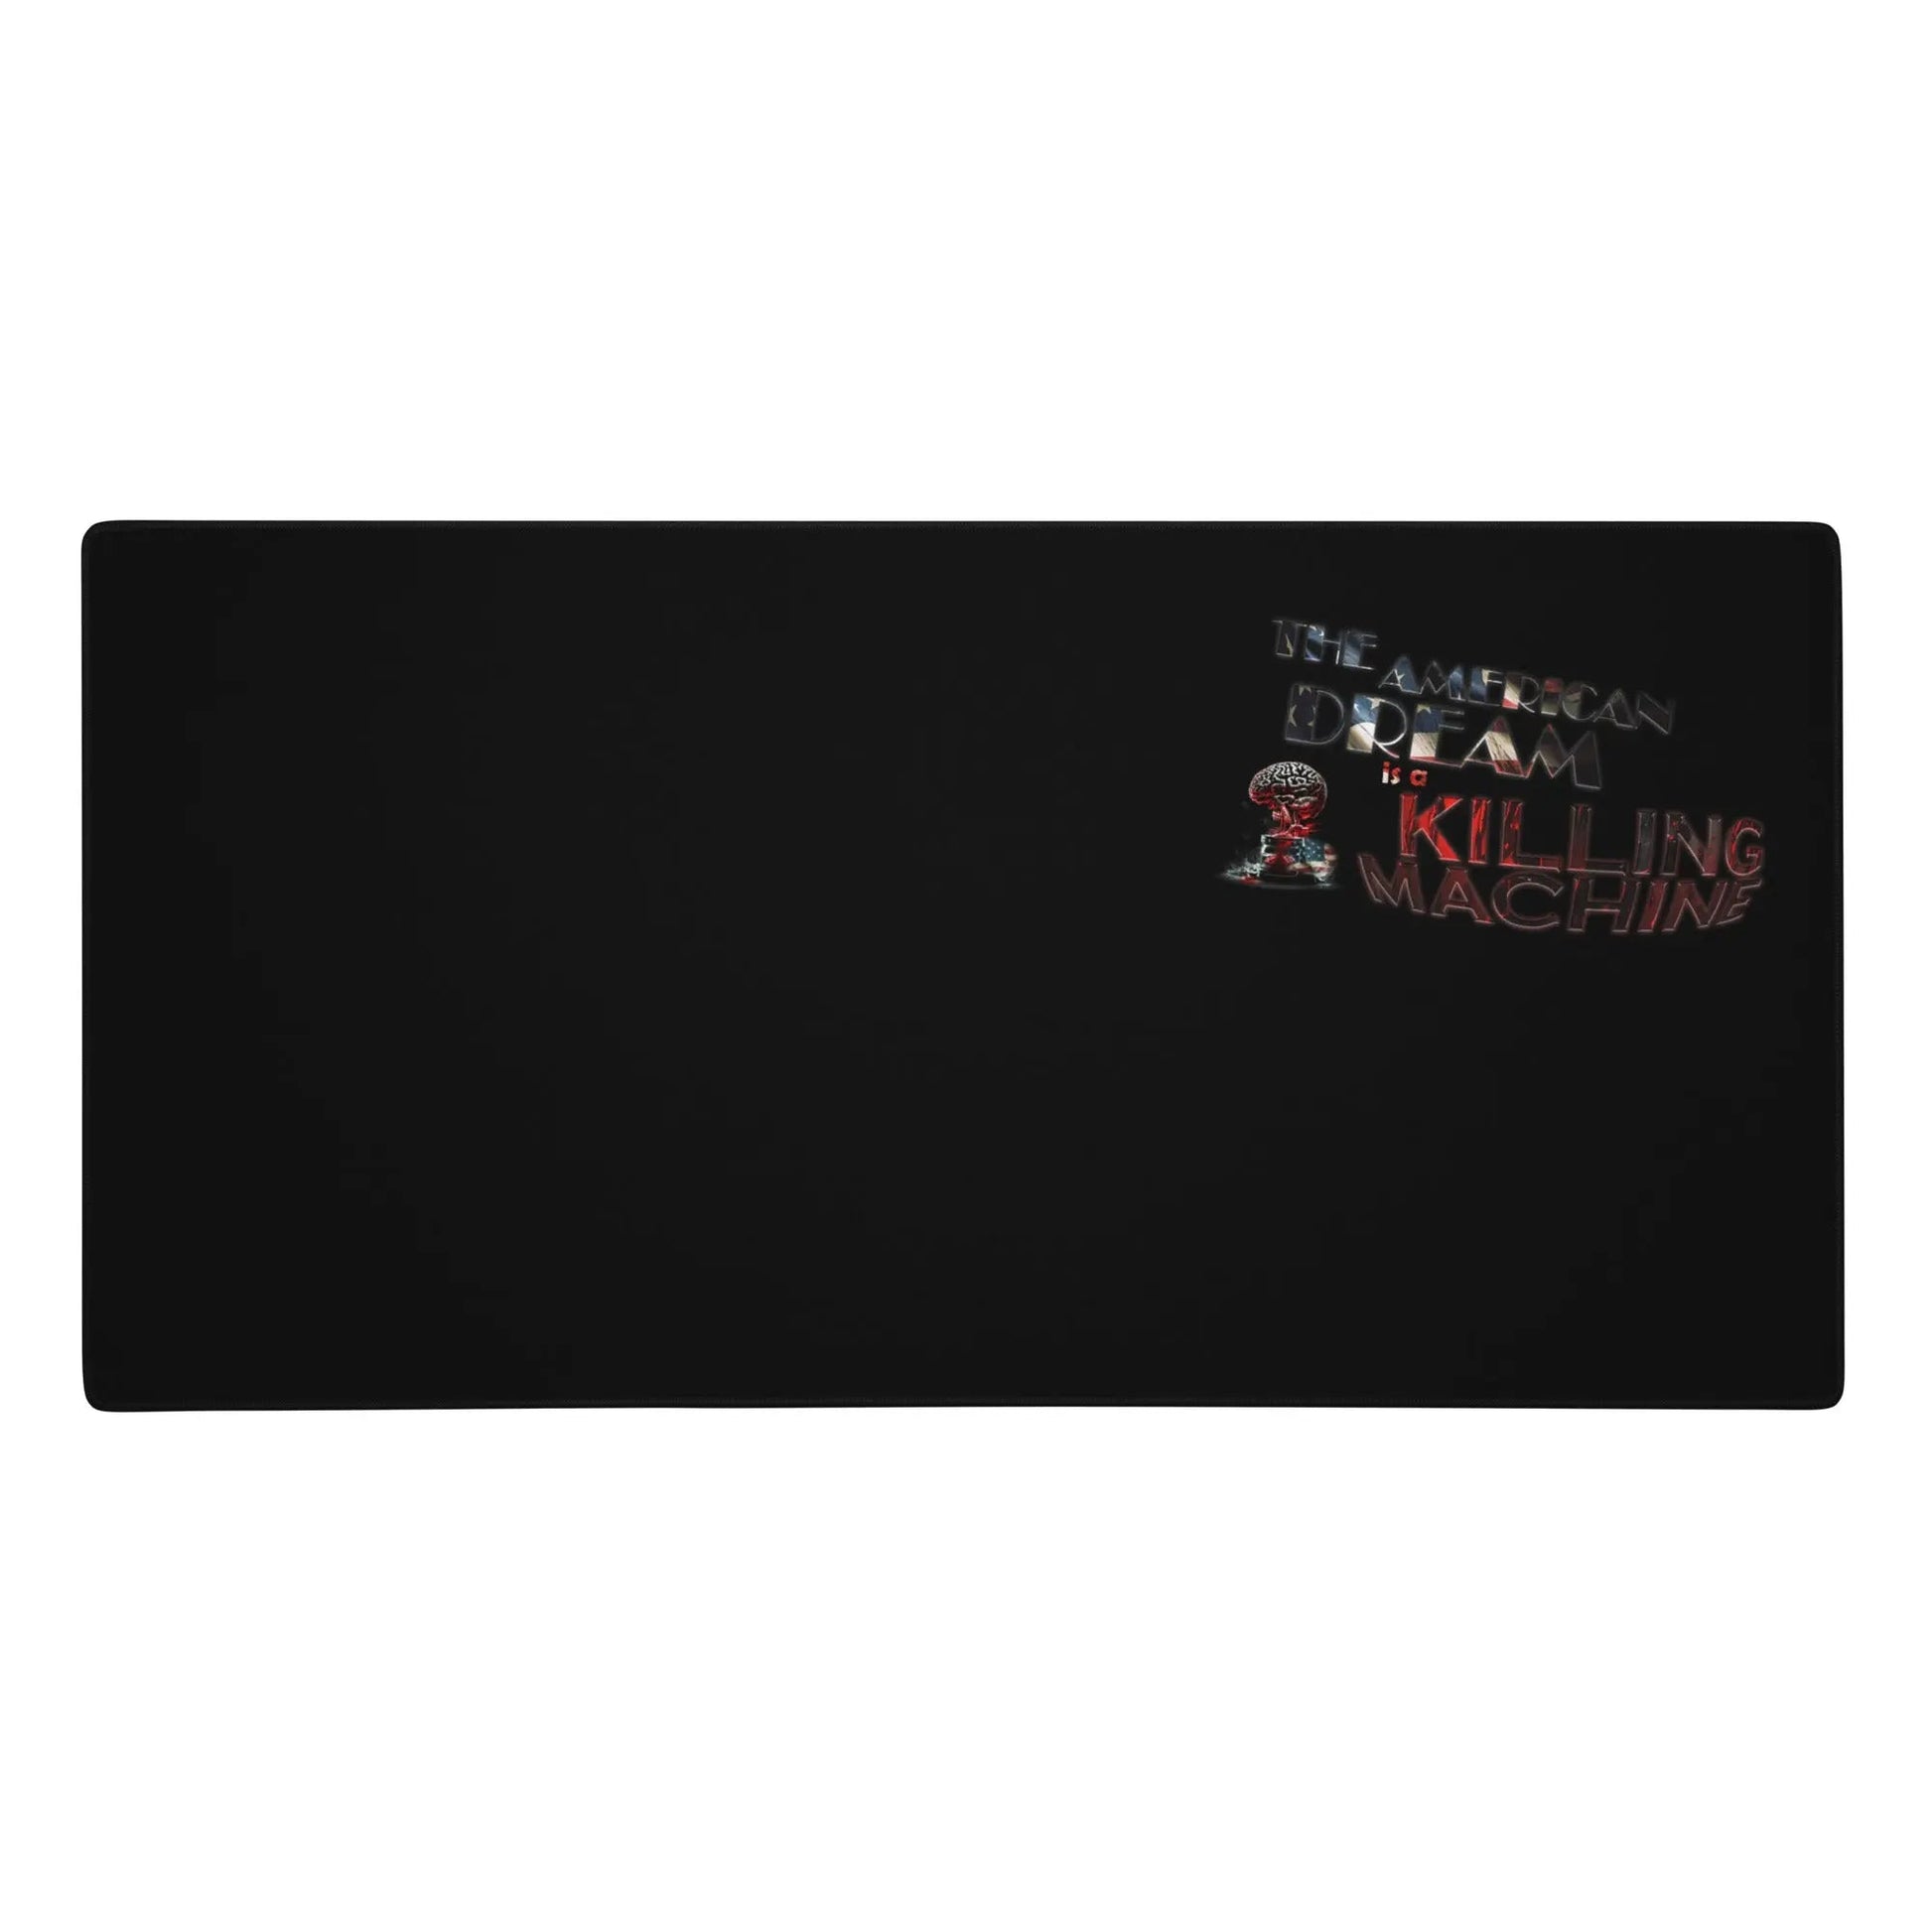 36″×18″ 1 Sense American Dream Gaming mouse pad by Neduz